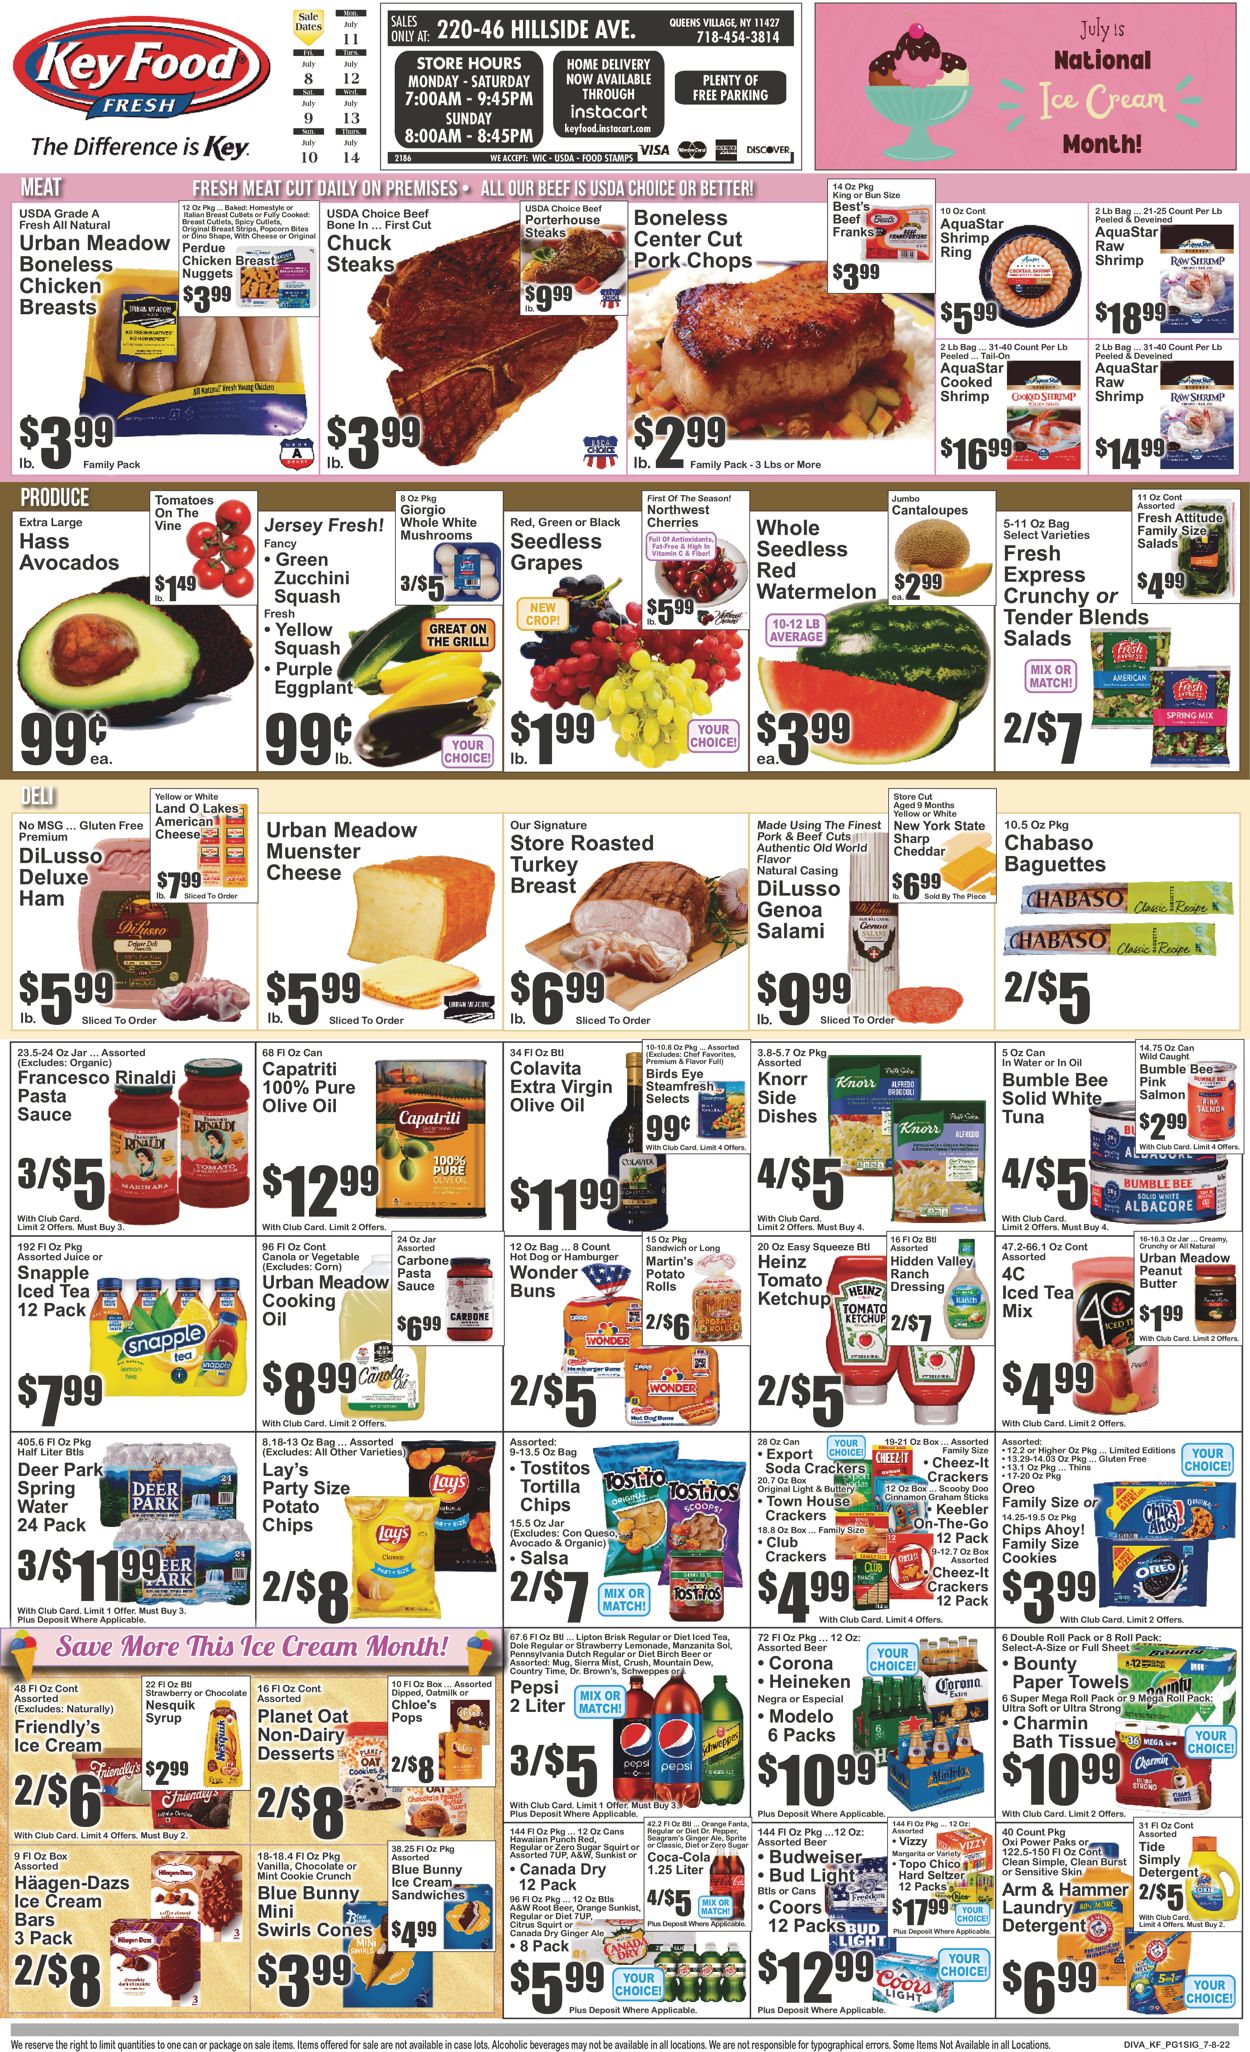 Key Food Current weekly ad 07/08 - 07/14/2022 - frequent-ads.com